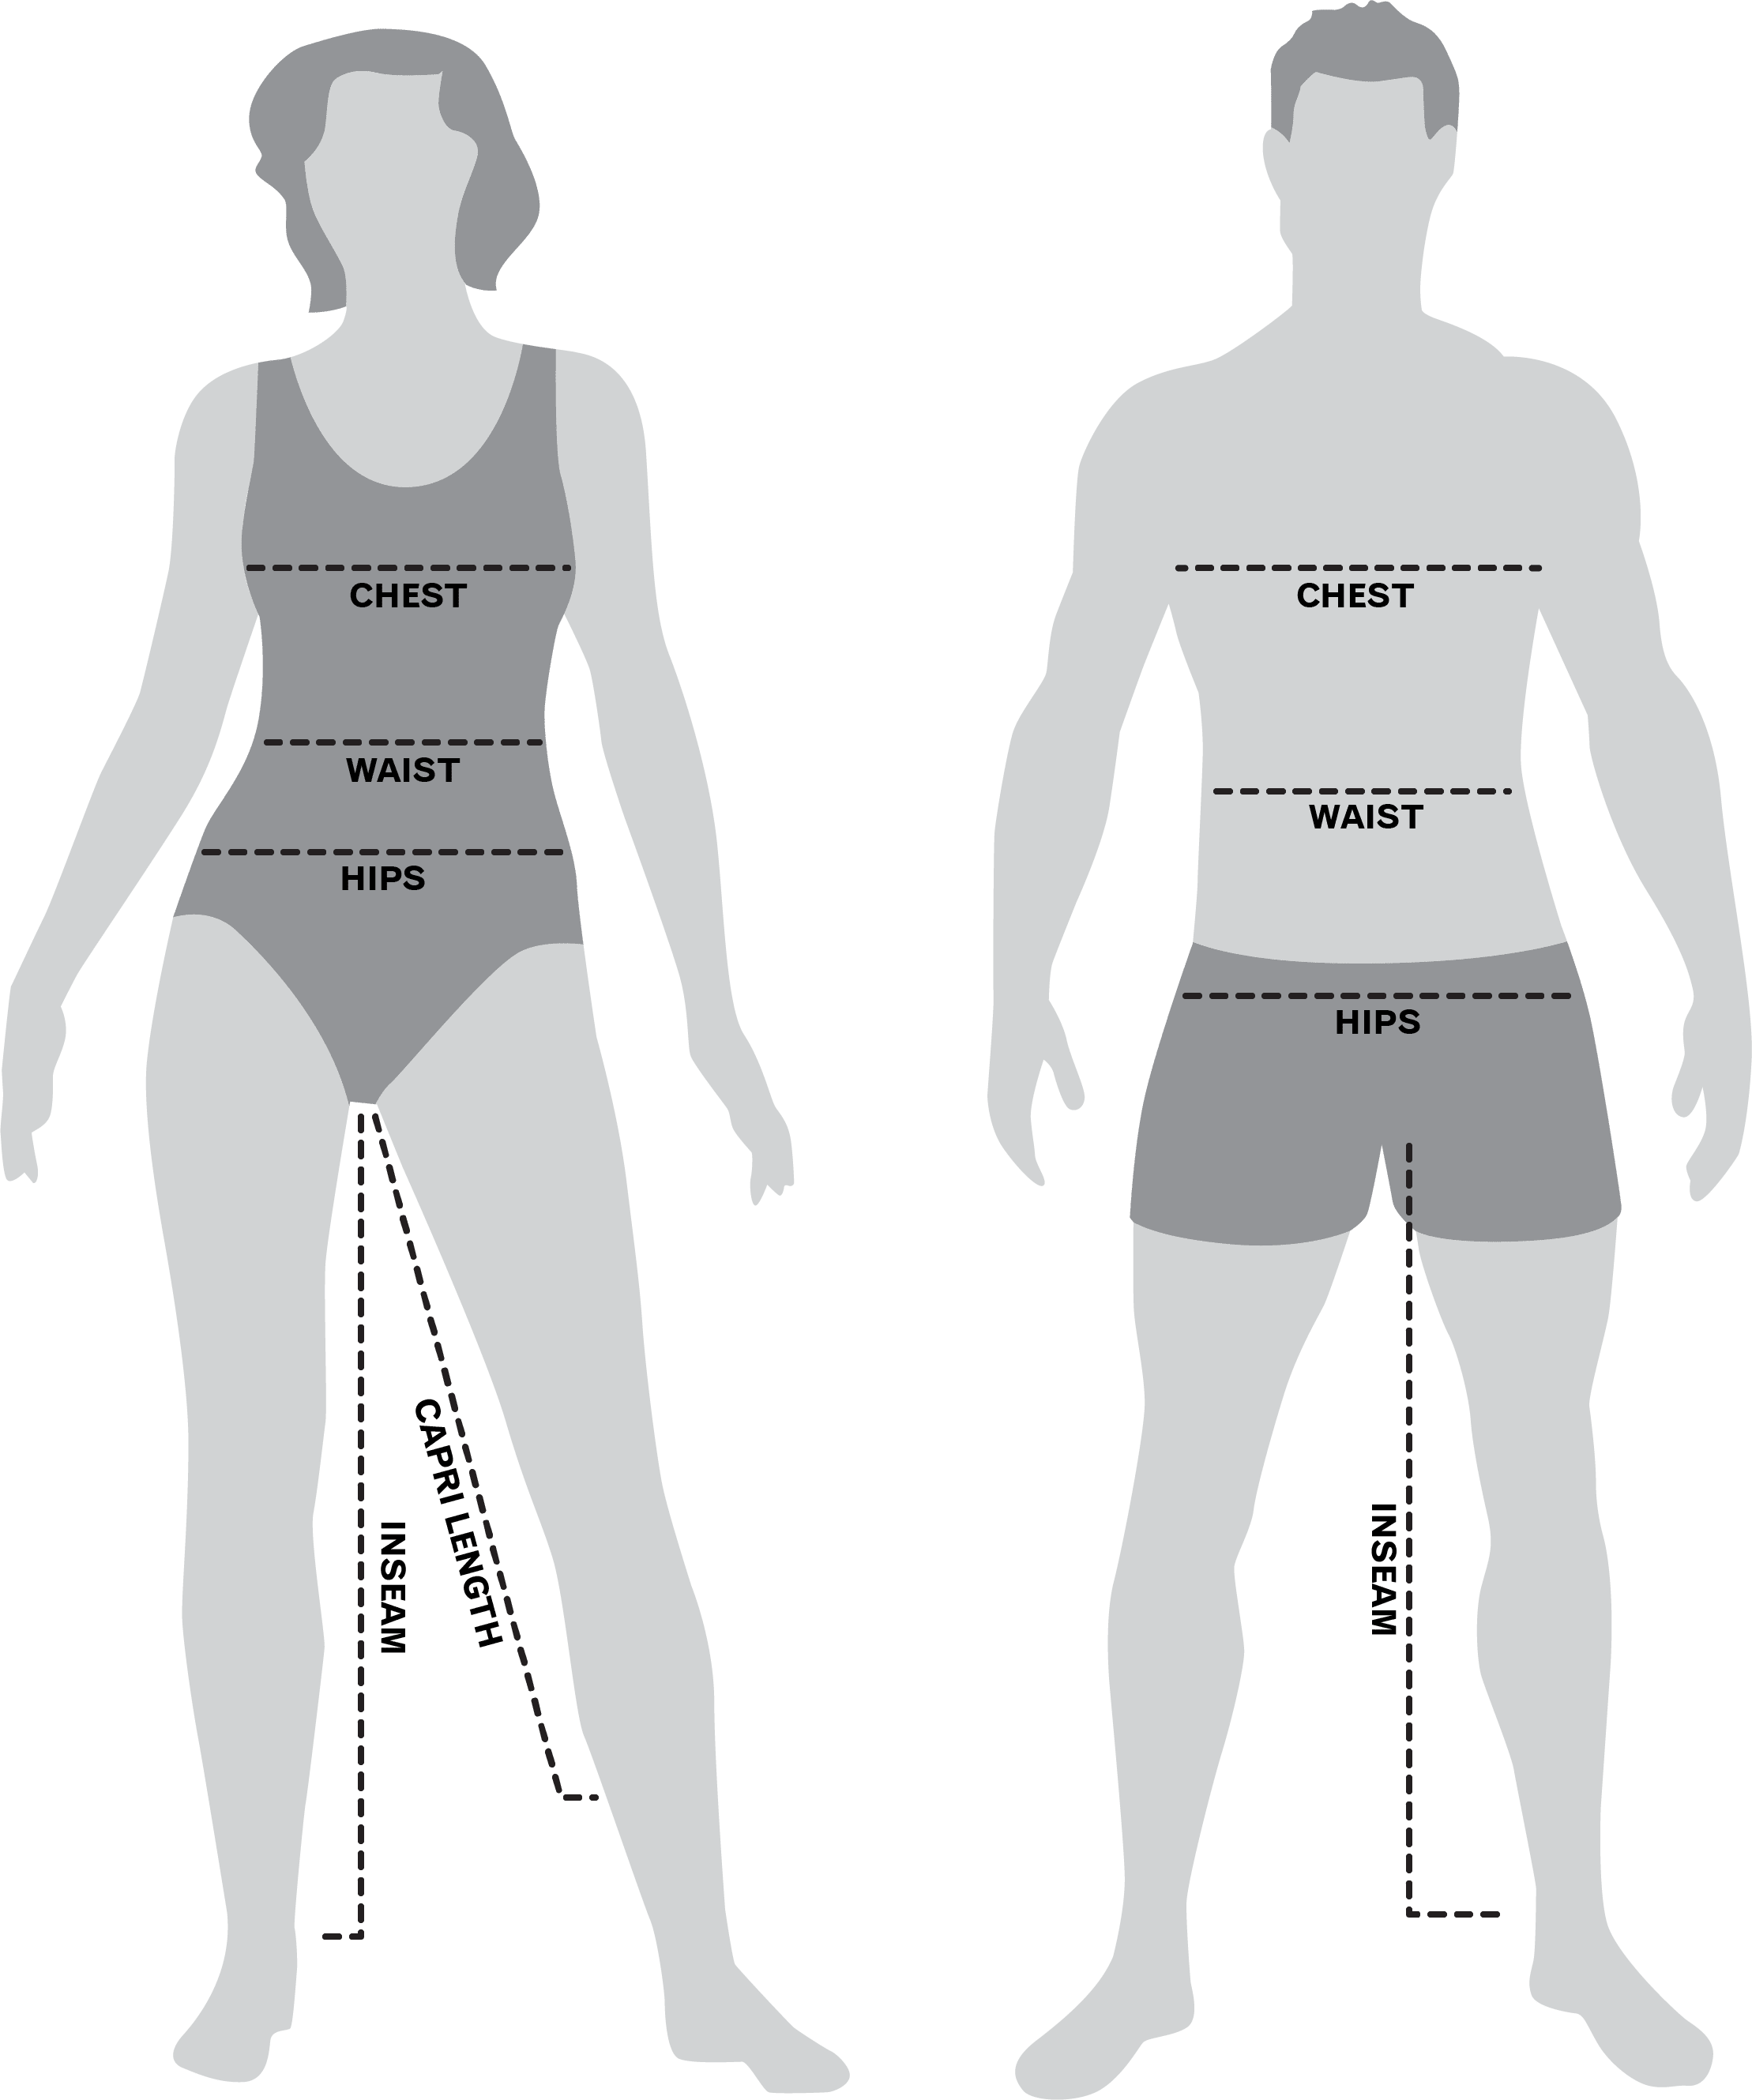 A " How To Measure Guide " to properly Size your Cheer Factor garments